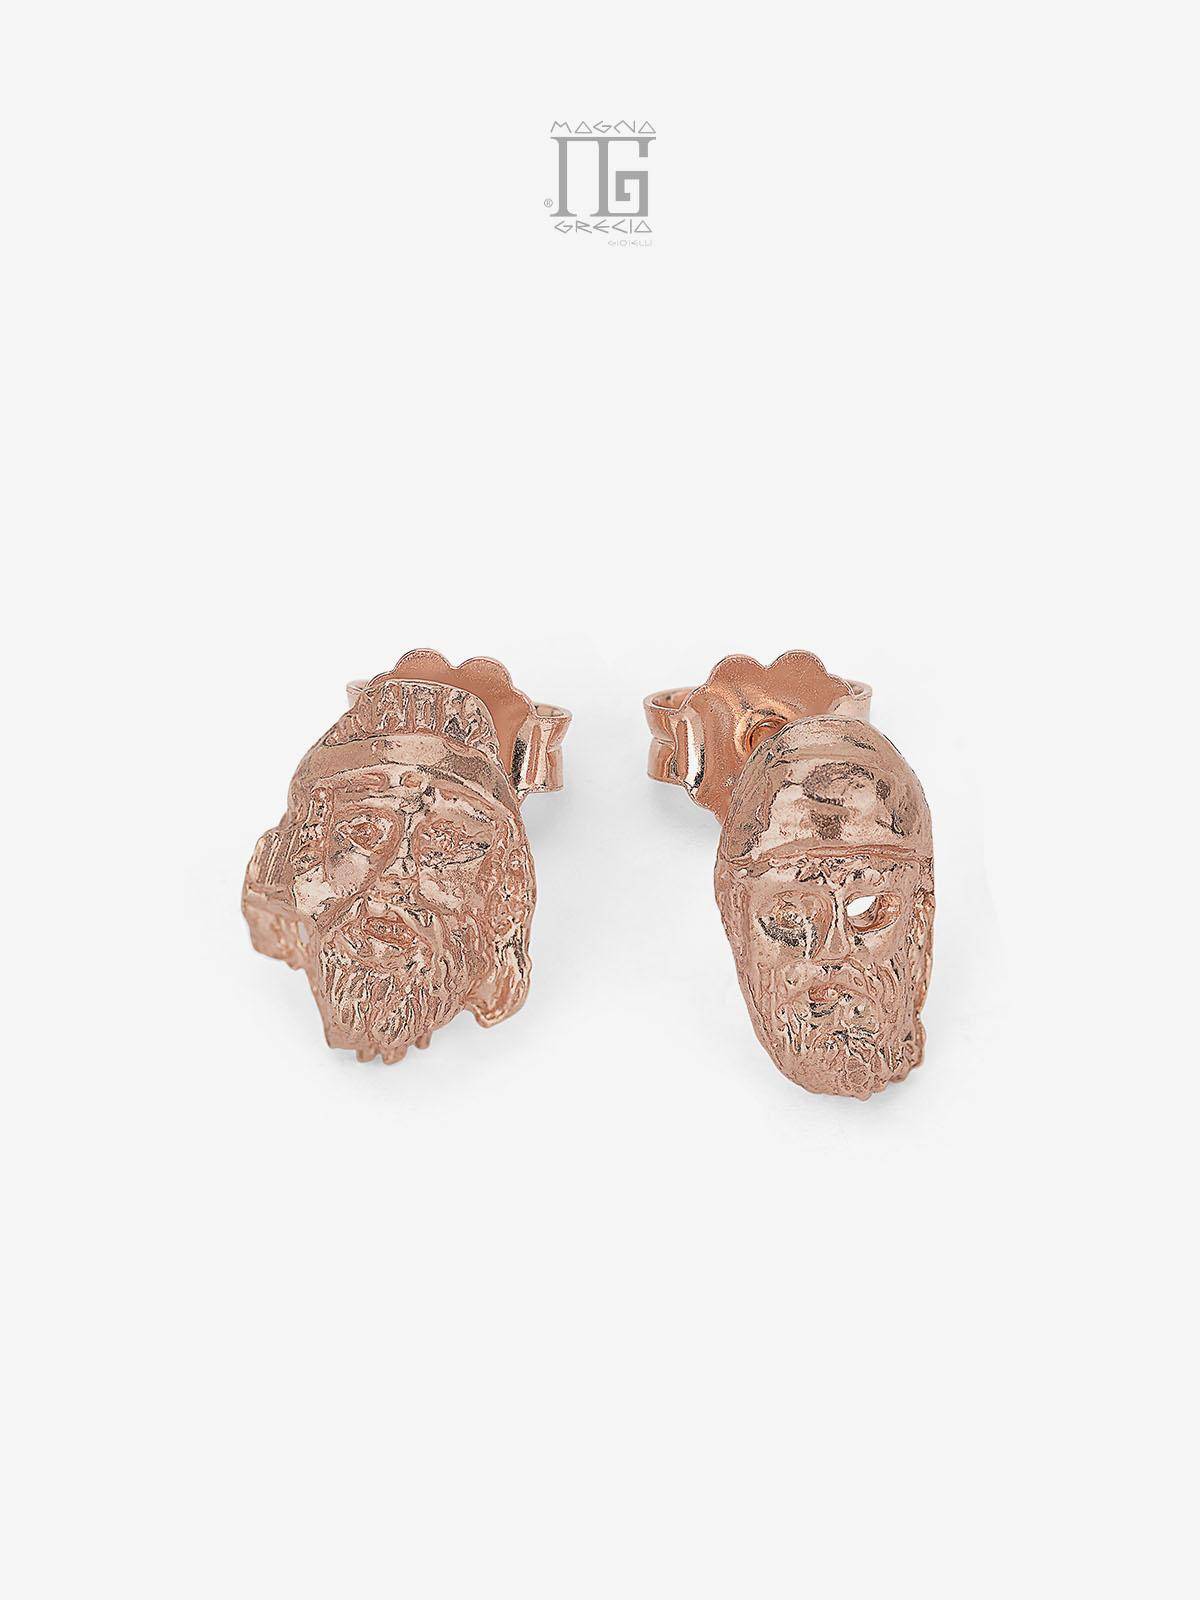 Silver earrings depicting the face of the Riace Bronzes Cod. MGK 4118 V